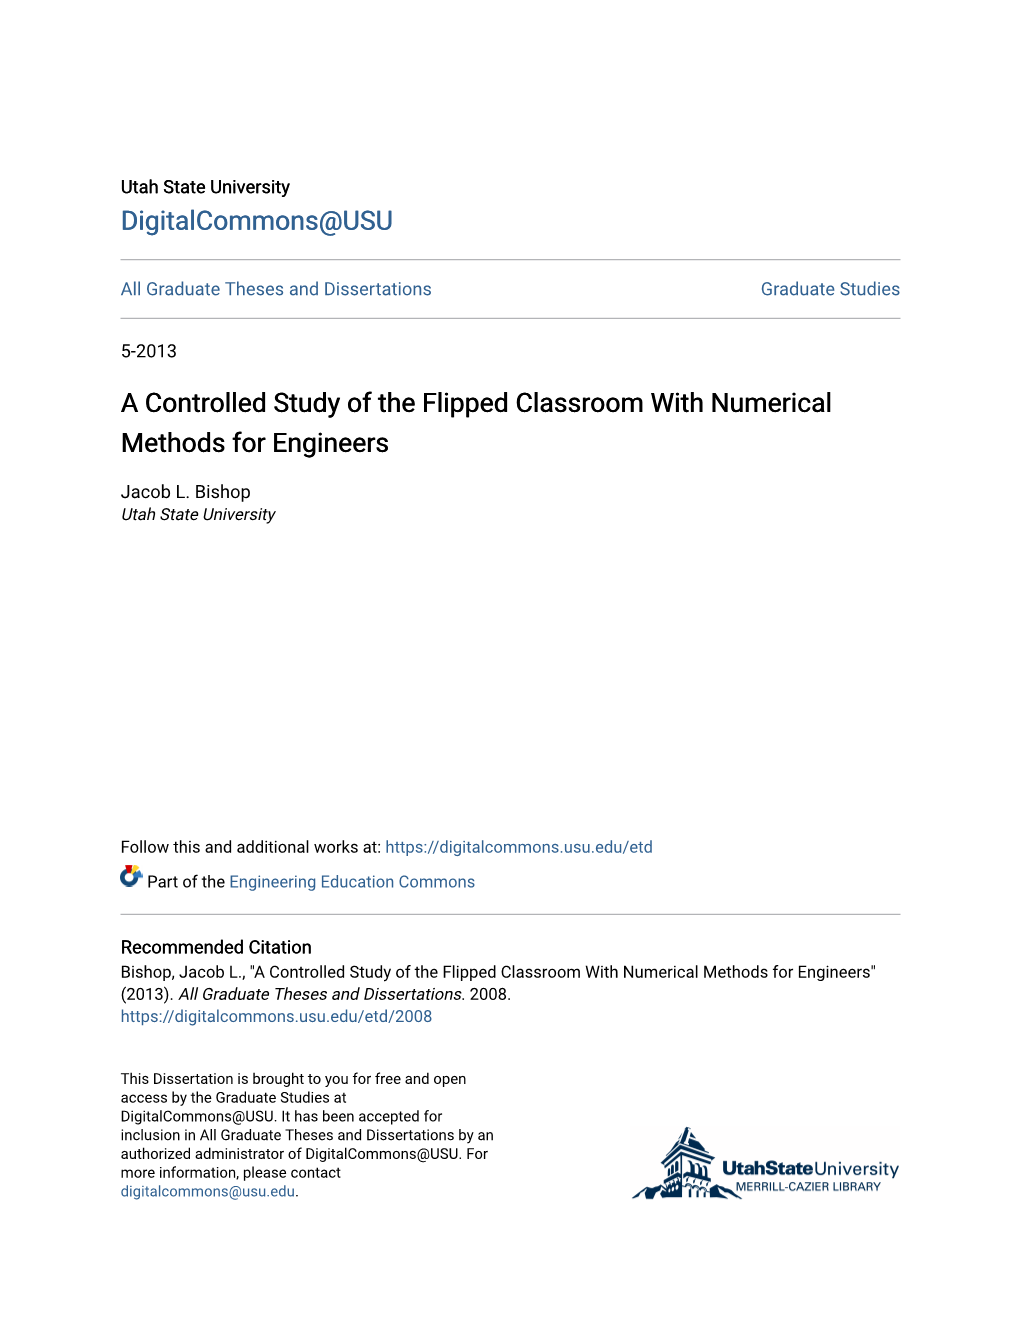 A Controlled Study of the Flipped Classroom with Numerical Methods for Engineers